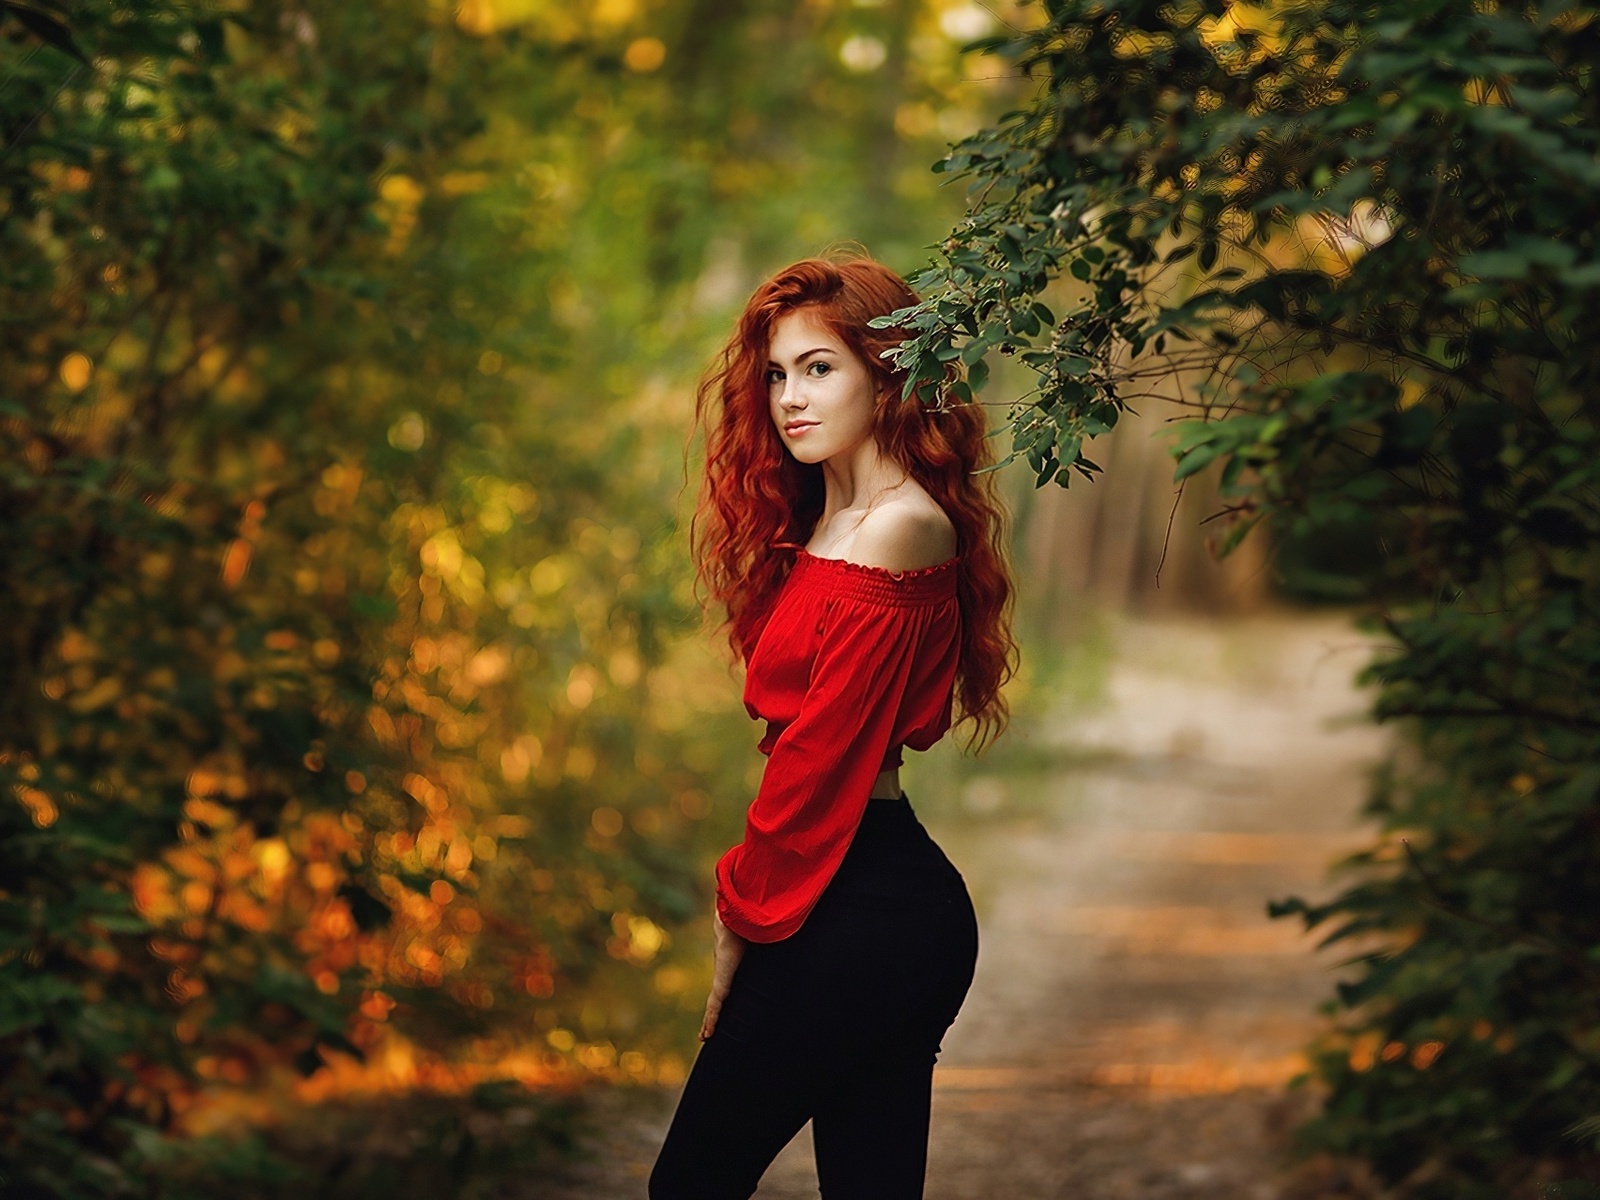 , forest, redhead, nature, black jeans, blouse, model, trees, women outdoors, red blouse, black pants, looking at viewer